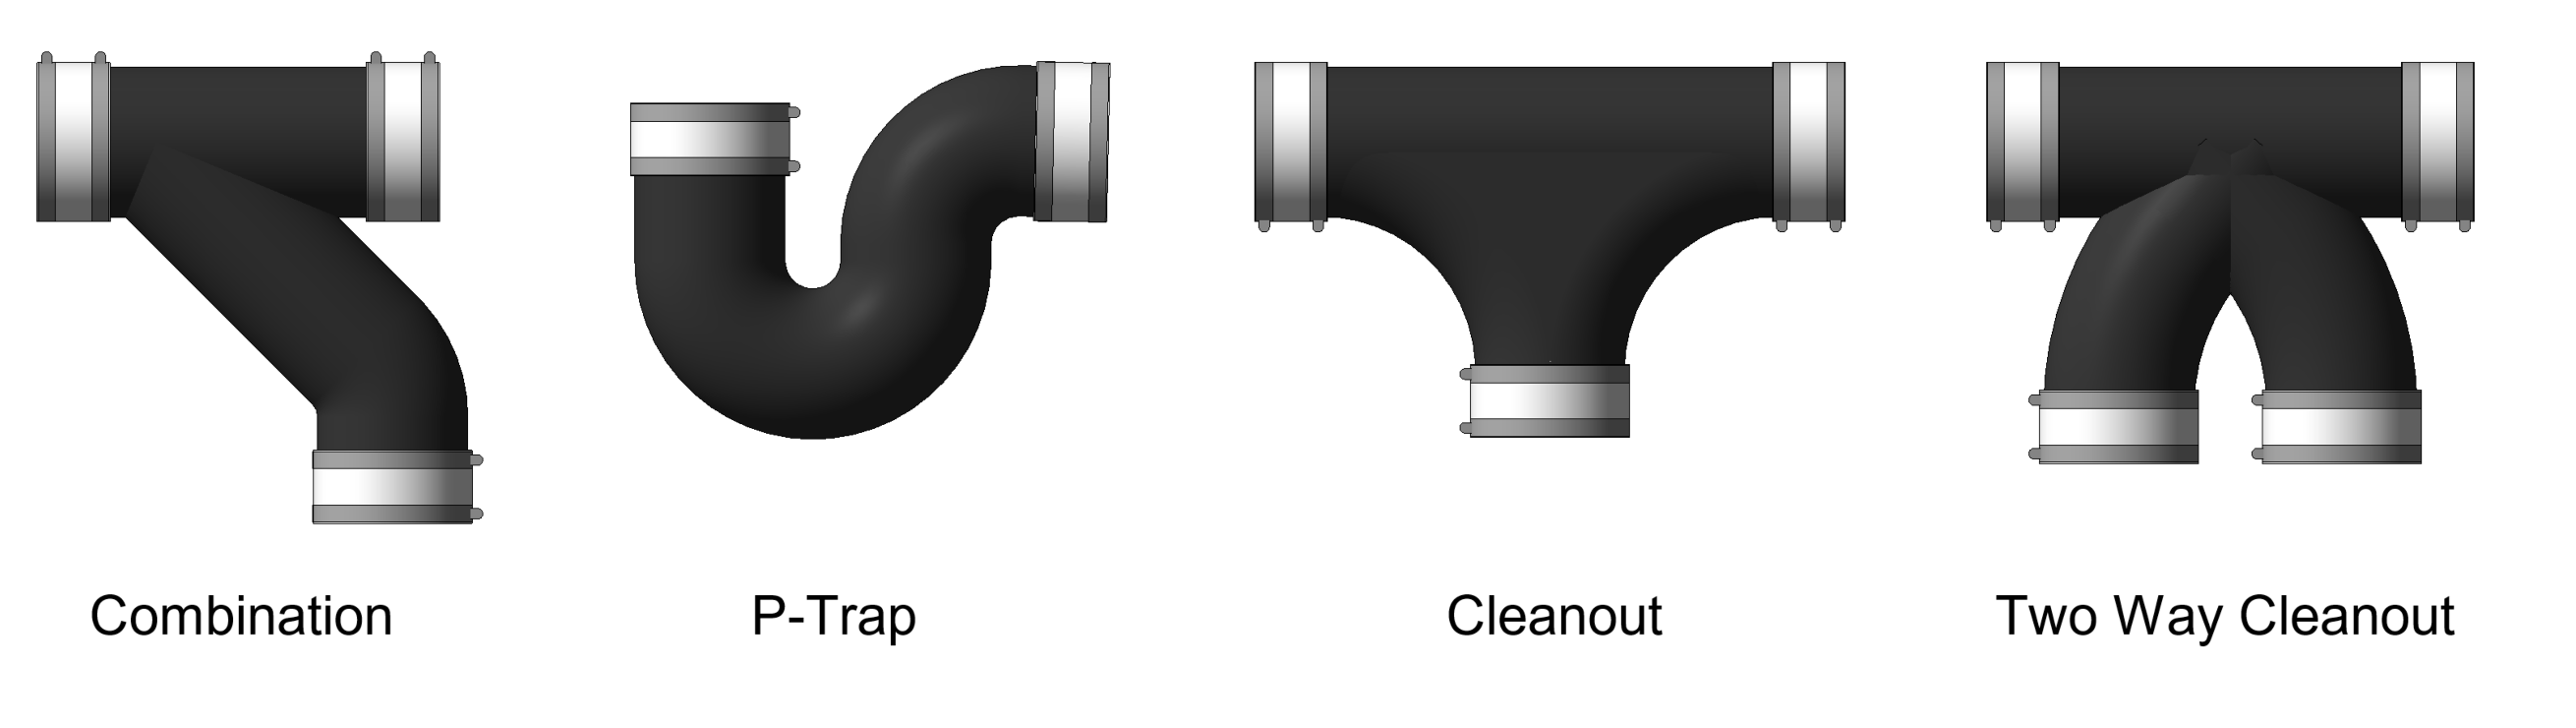 Revit plan view showing 4 different Charlotte pipe fittings: Combination, P-Trap, Cleanout, Two Way Cleanout 